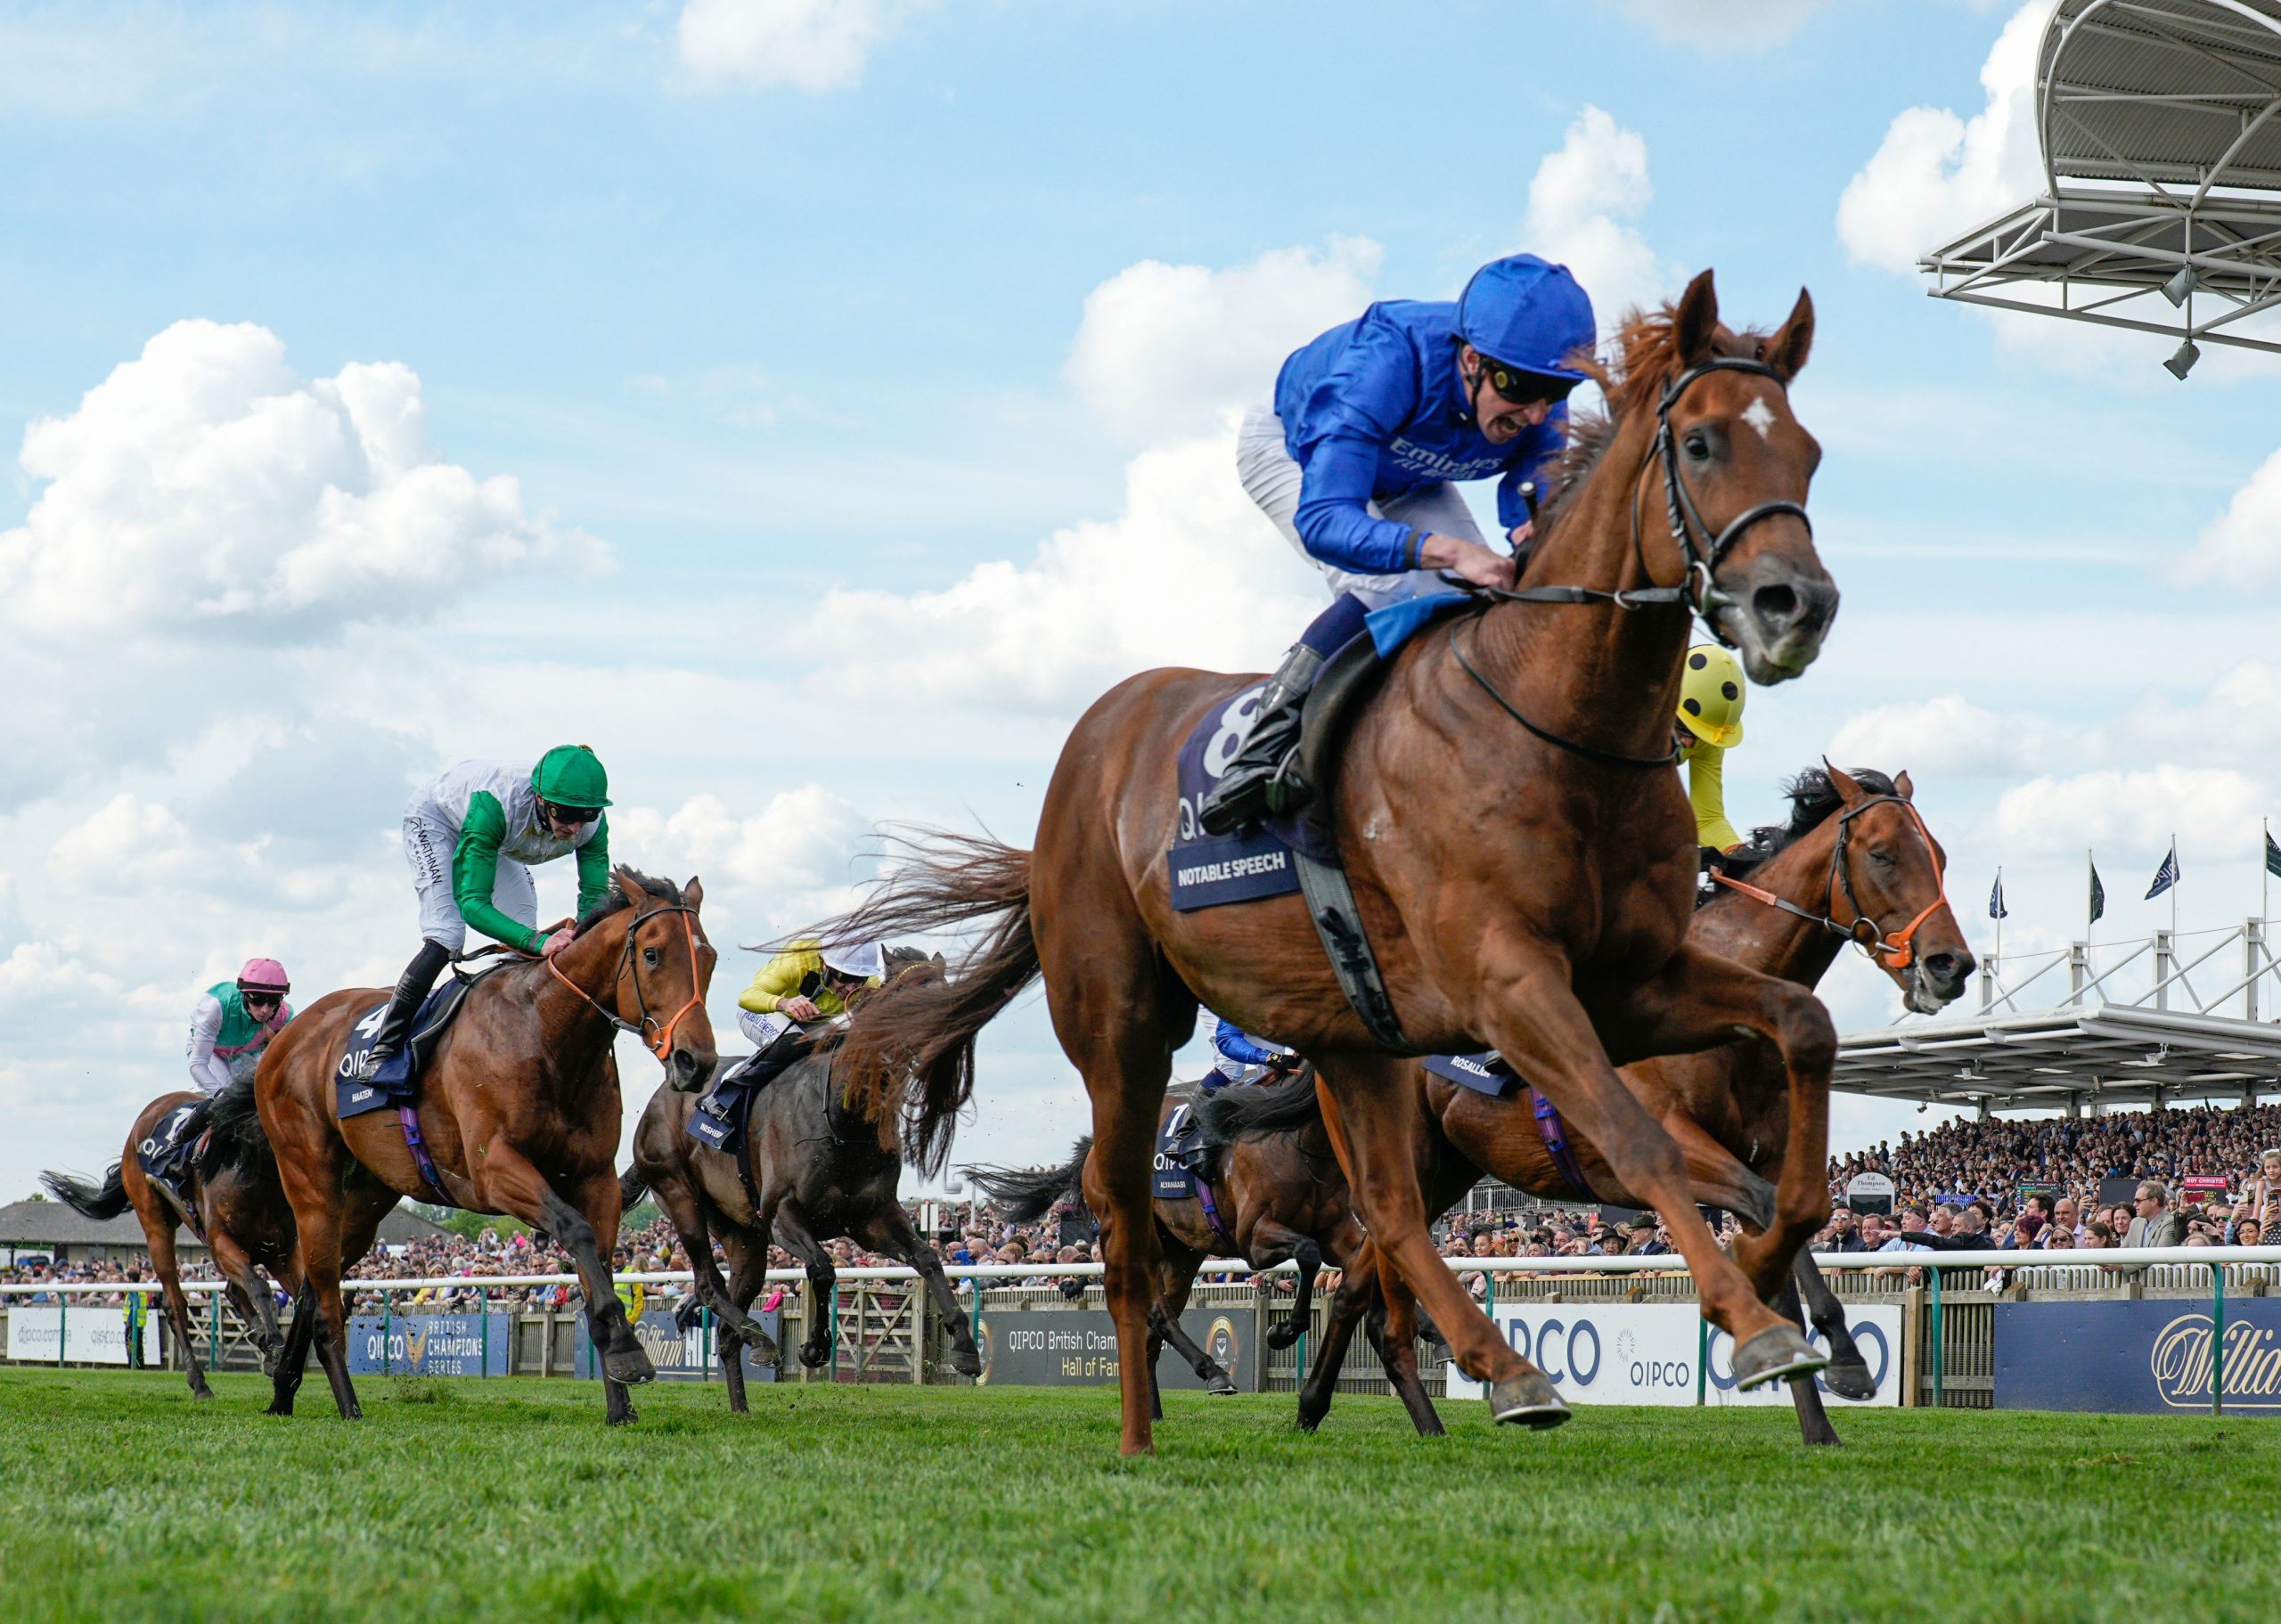 Notable Speech gallops to a memorable and unexpected victory at Newmarket with Buick on board